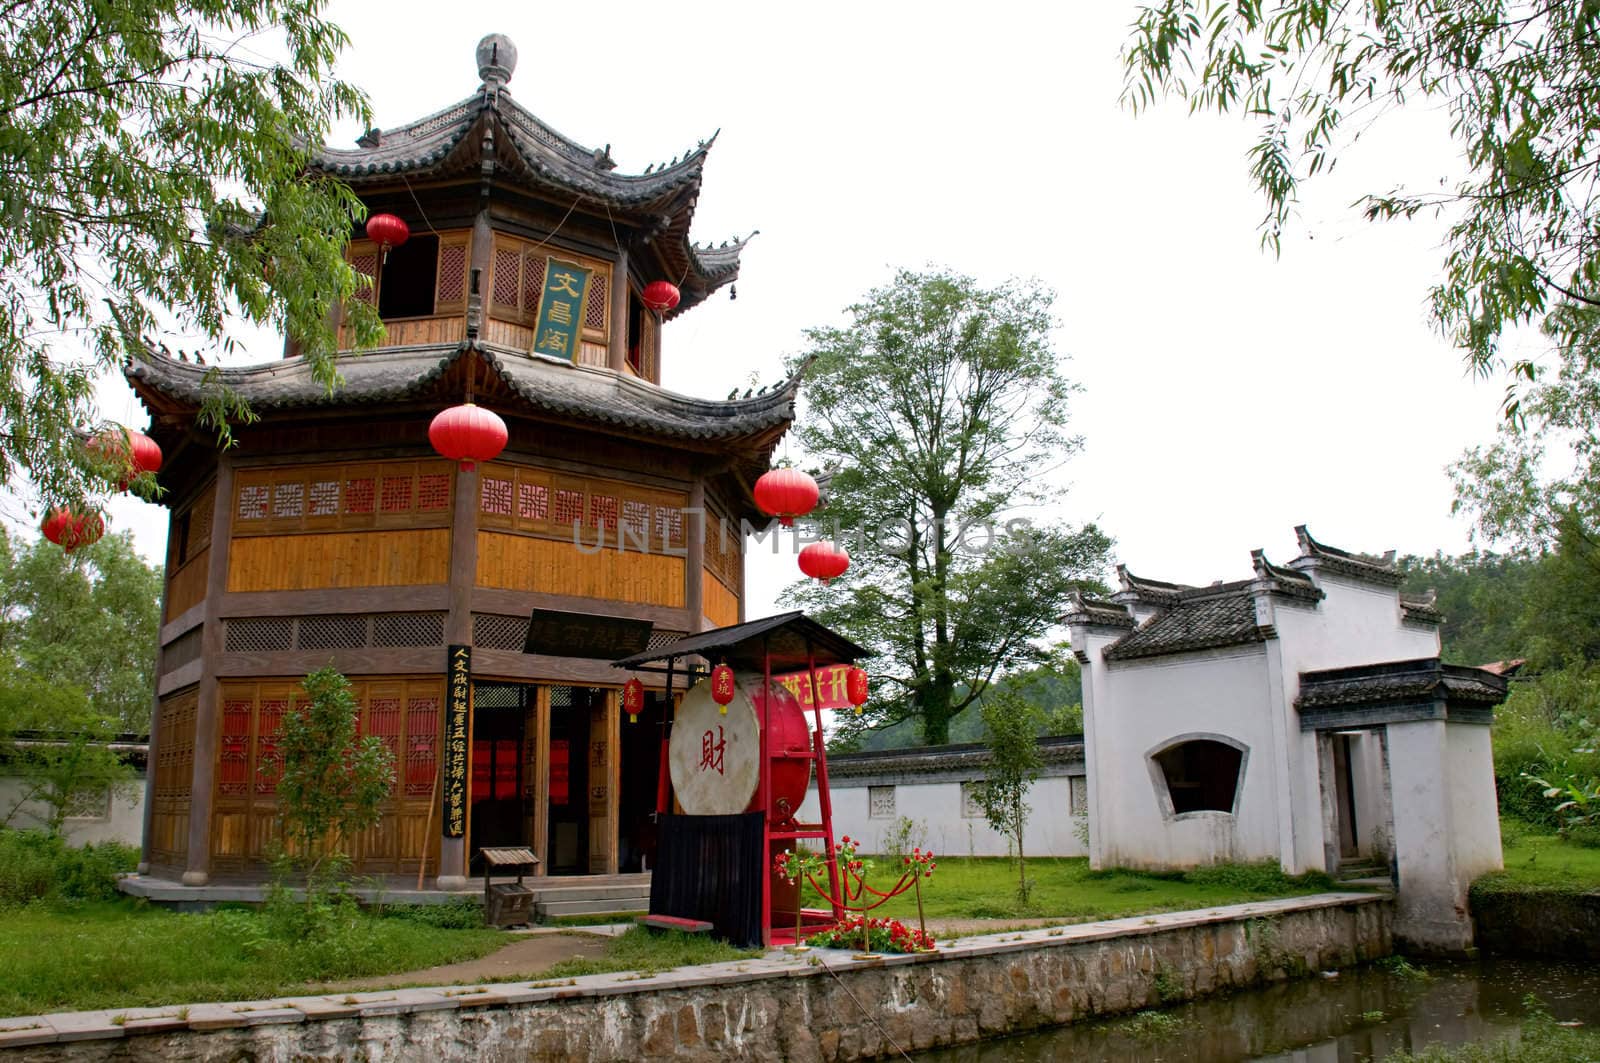 The pagoda and  pavilion of Chinese garden, jiangxi